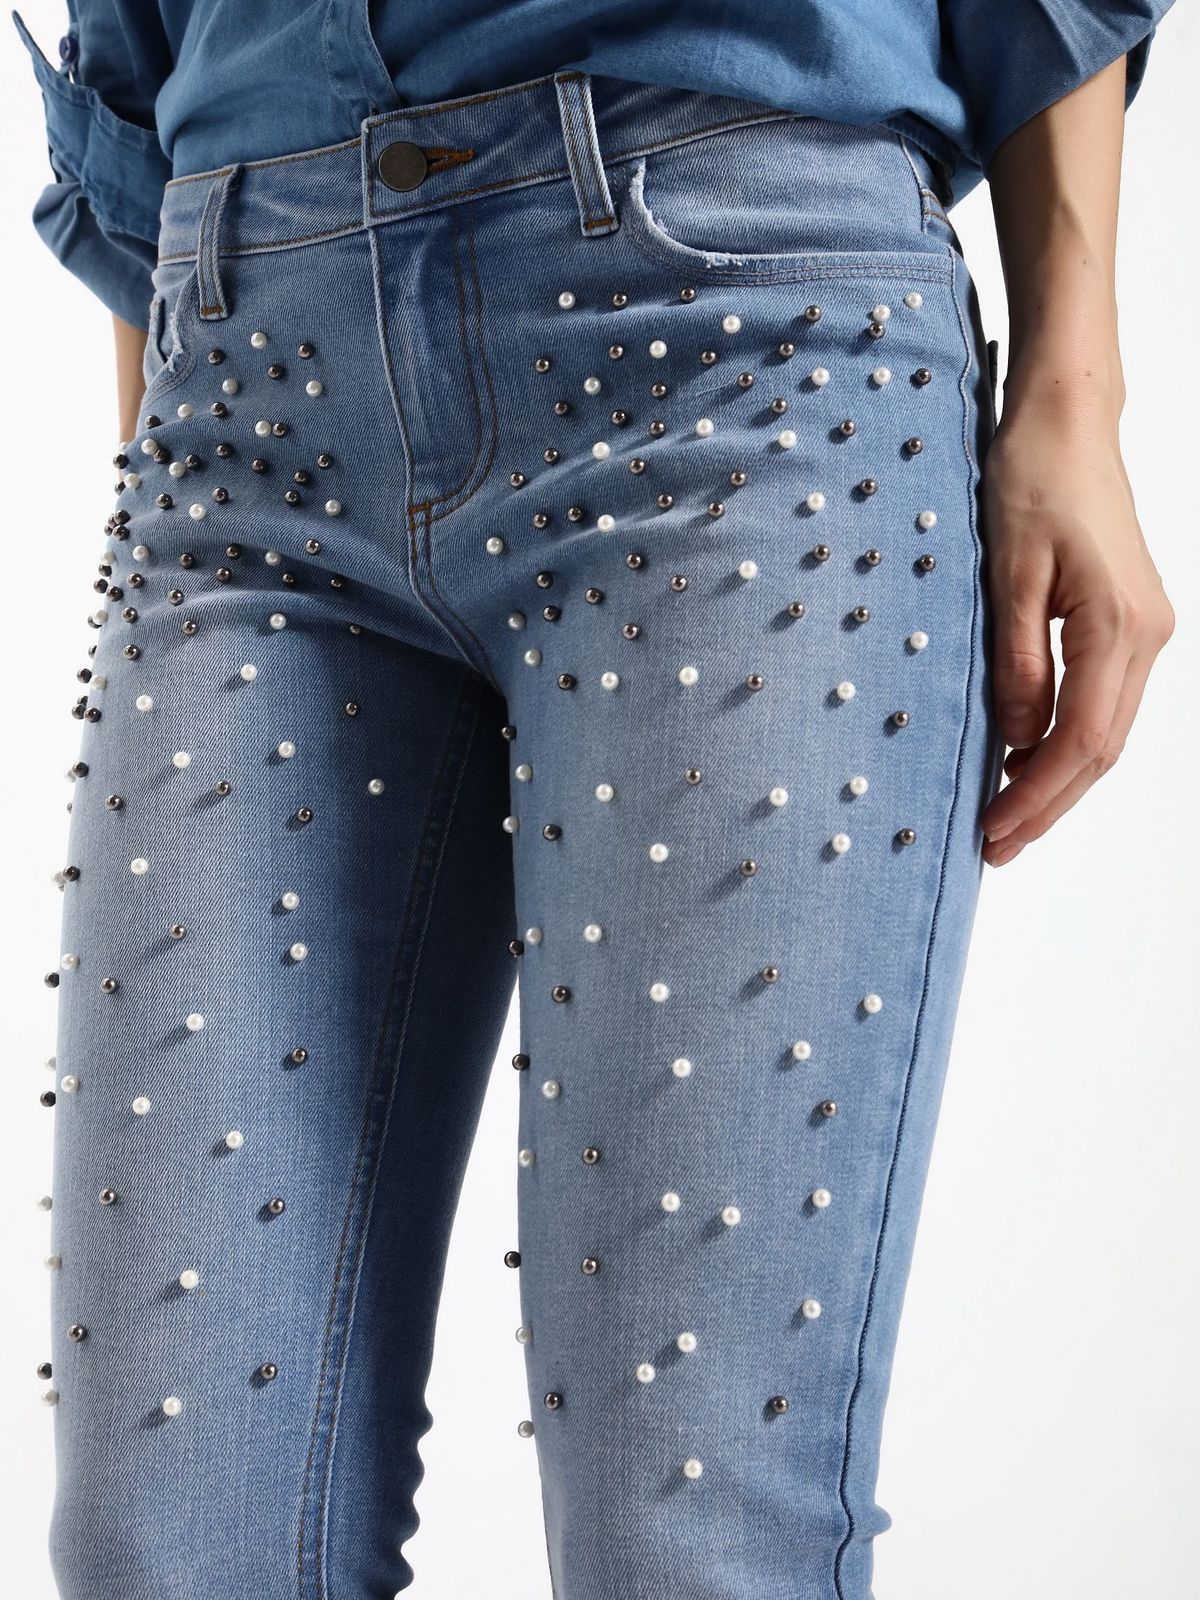 Top Secret blue skinny jeans jeans with pockets and pearl embellished ...